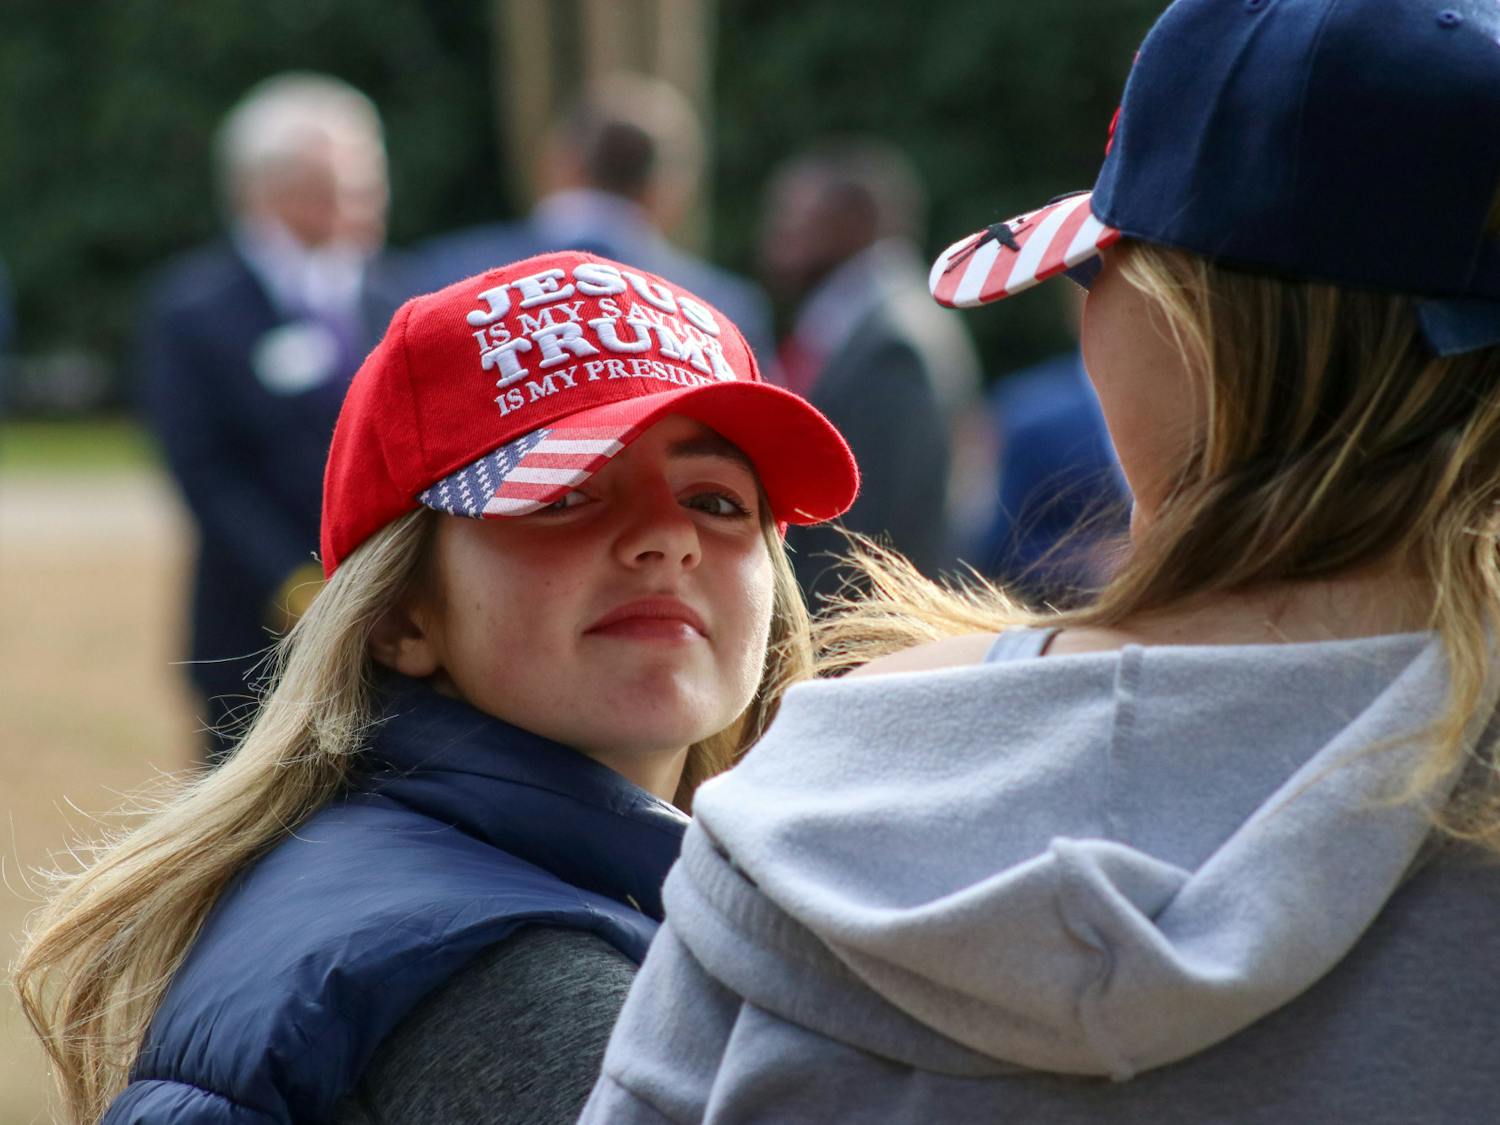 A woman (left) wears as a hat that says "JESUS is my savior, TRUMP is my president," while standing along the fence outside the Statehouse on Jan. 28, 2023. The MAGA branding of bright red and American flags could be seen across the Statehouse lawn, as former President Donald Trump's private campaign event brought many local Trump supporters back into the public eye.&nbsp;